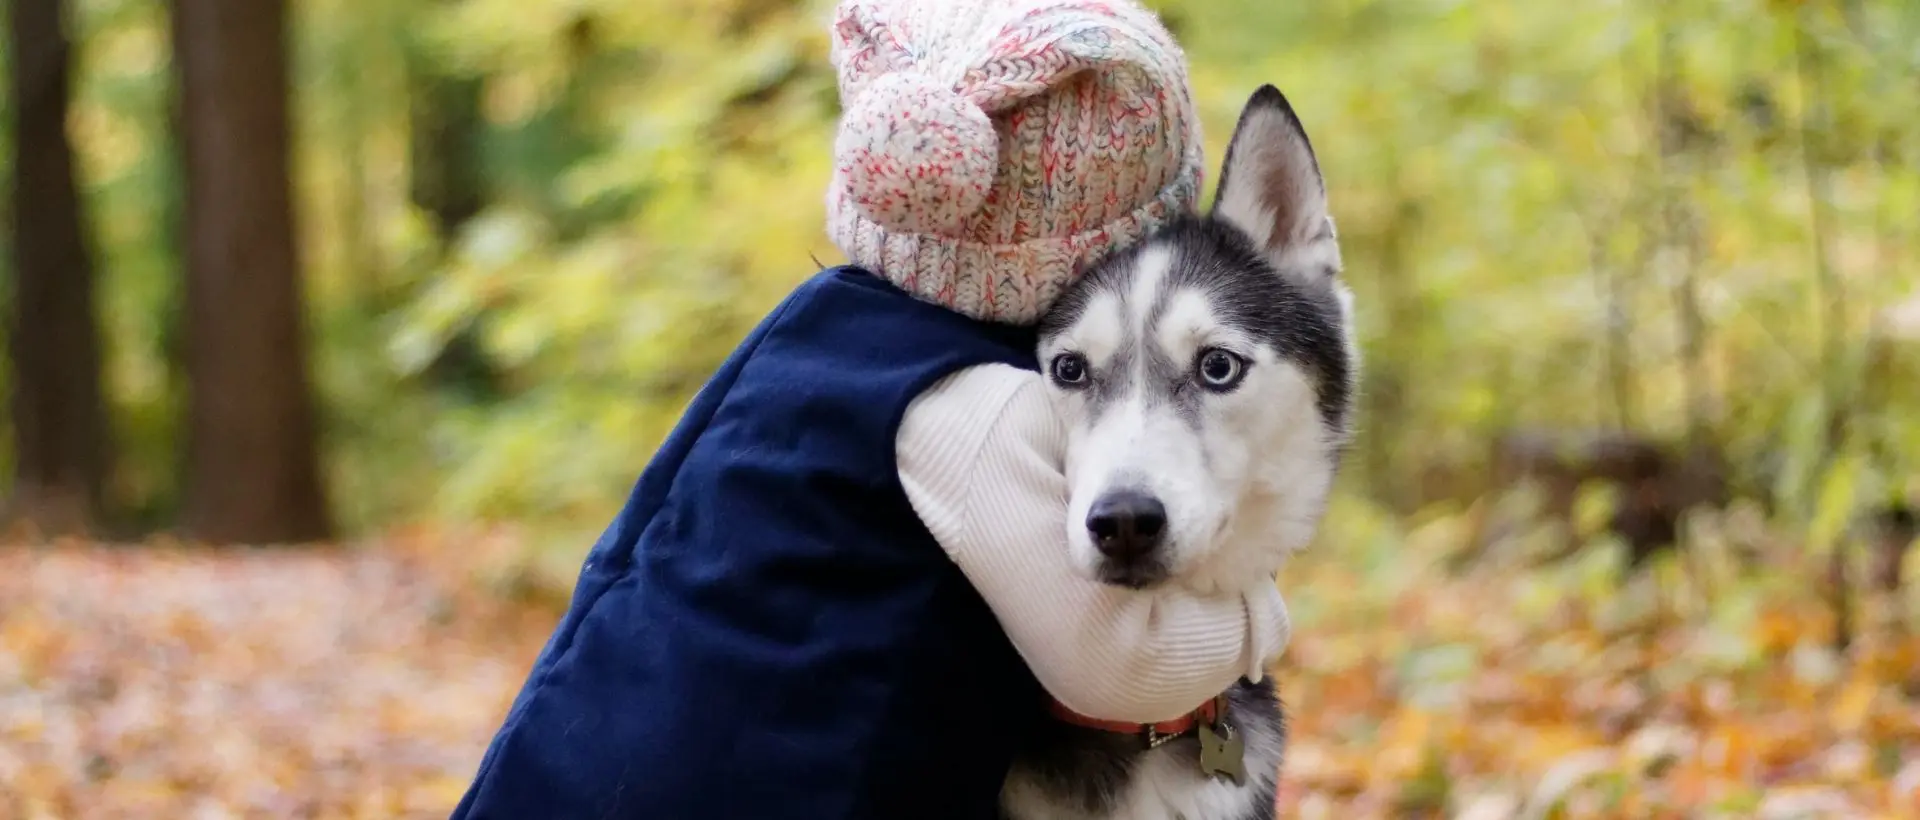 a woman holding a husky dog in her arms.